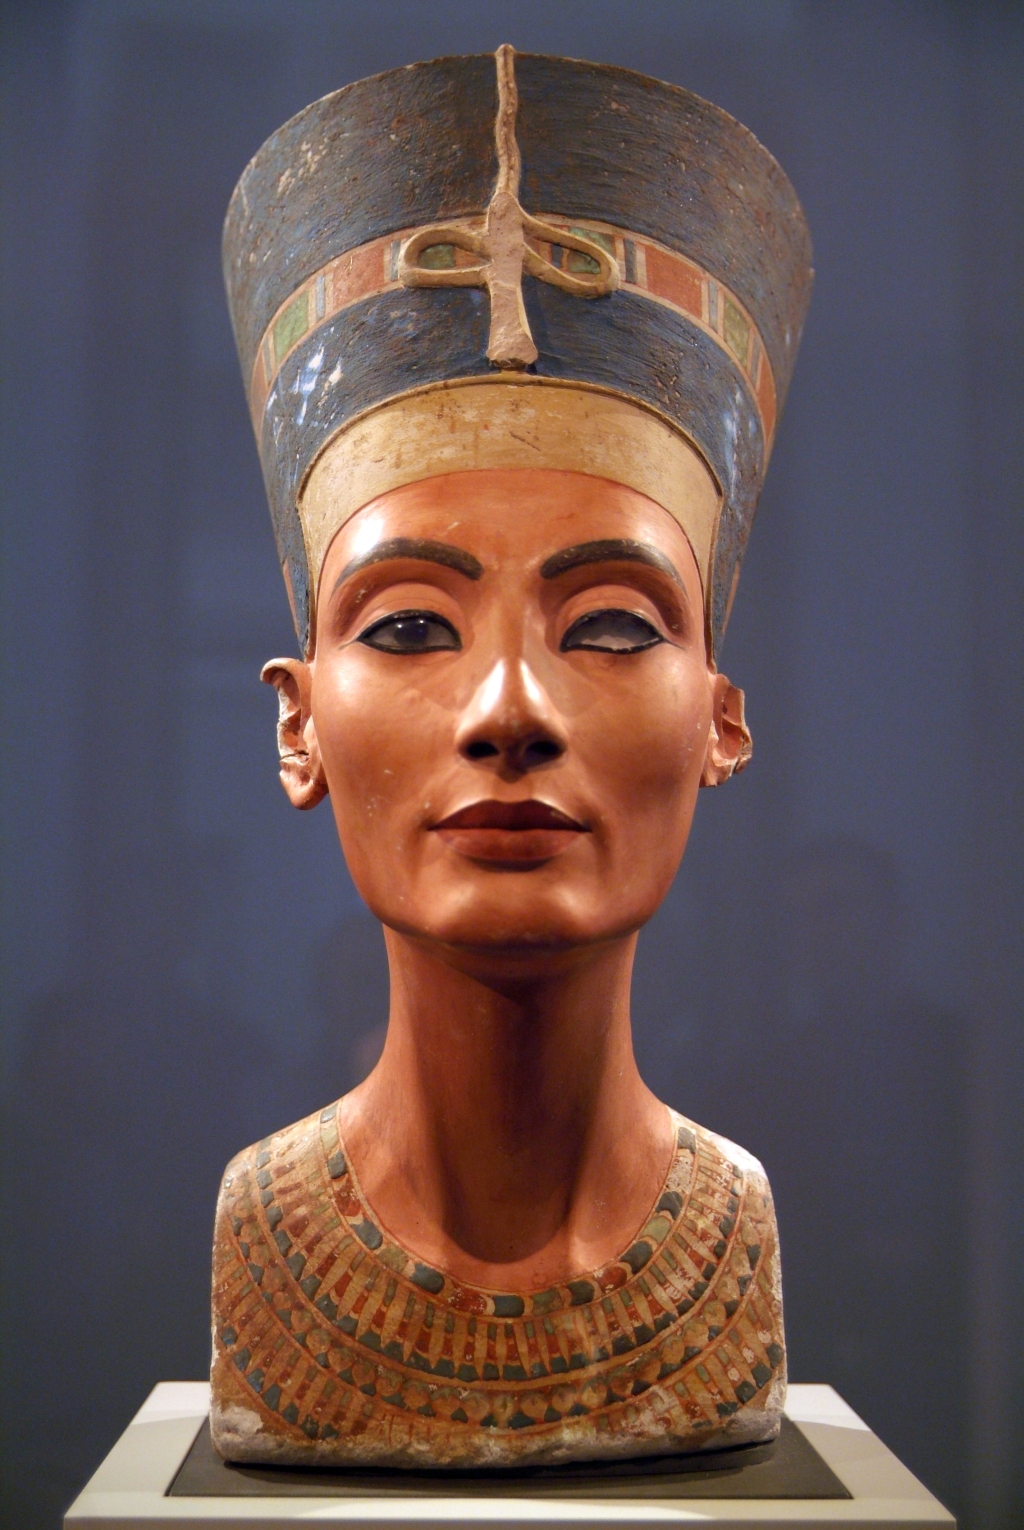 Face Reading Nefertiti: The Bust and its Secrets (Subscriber Content)